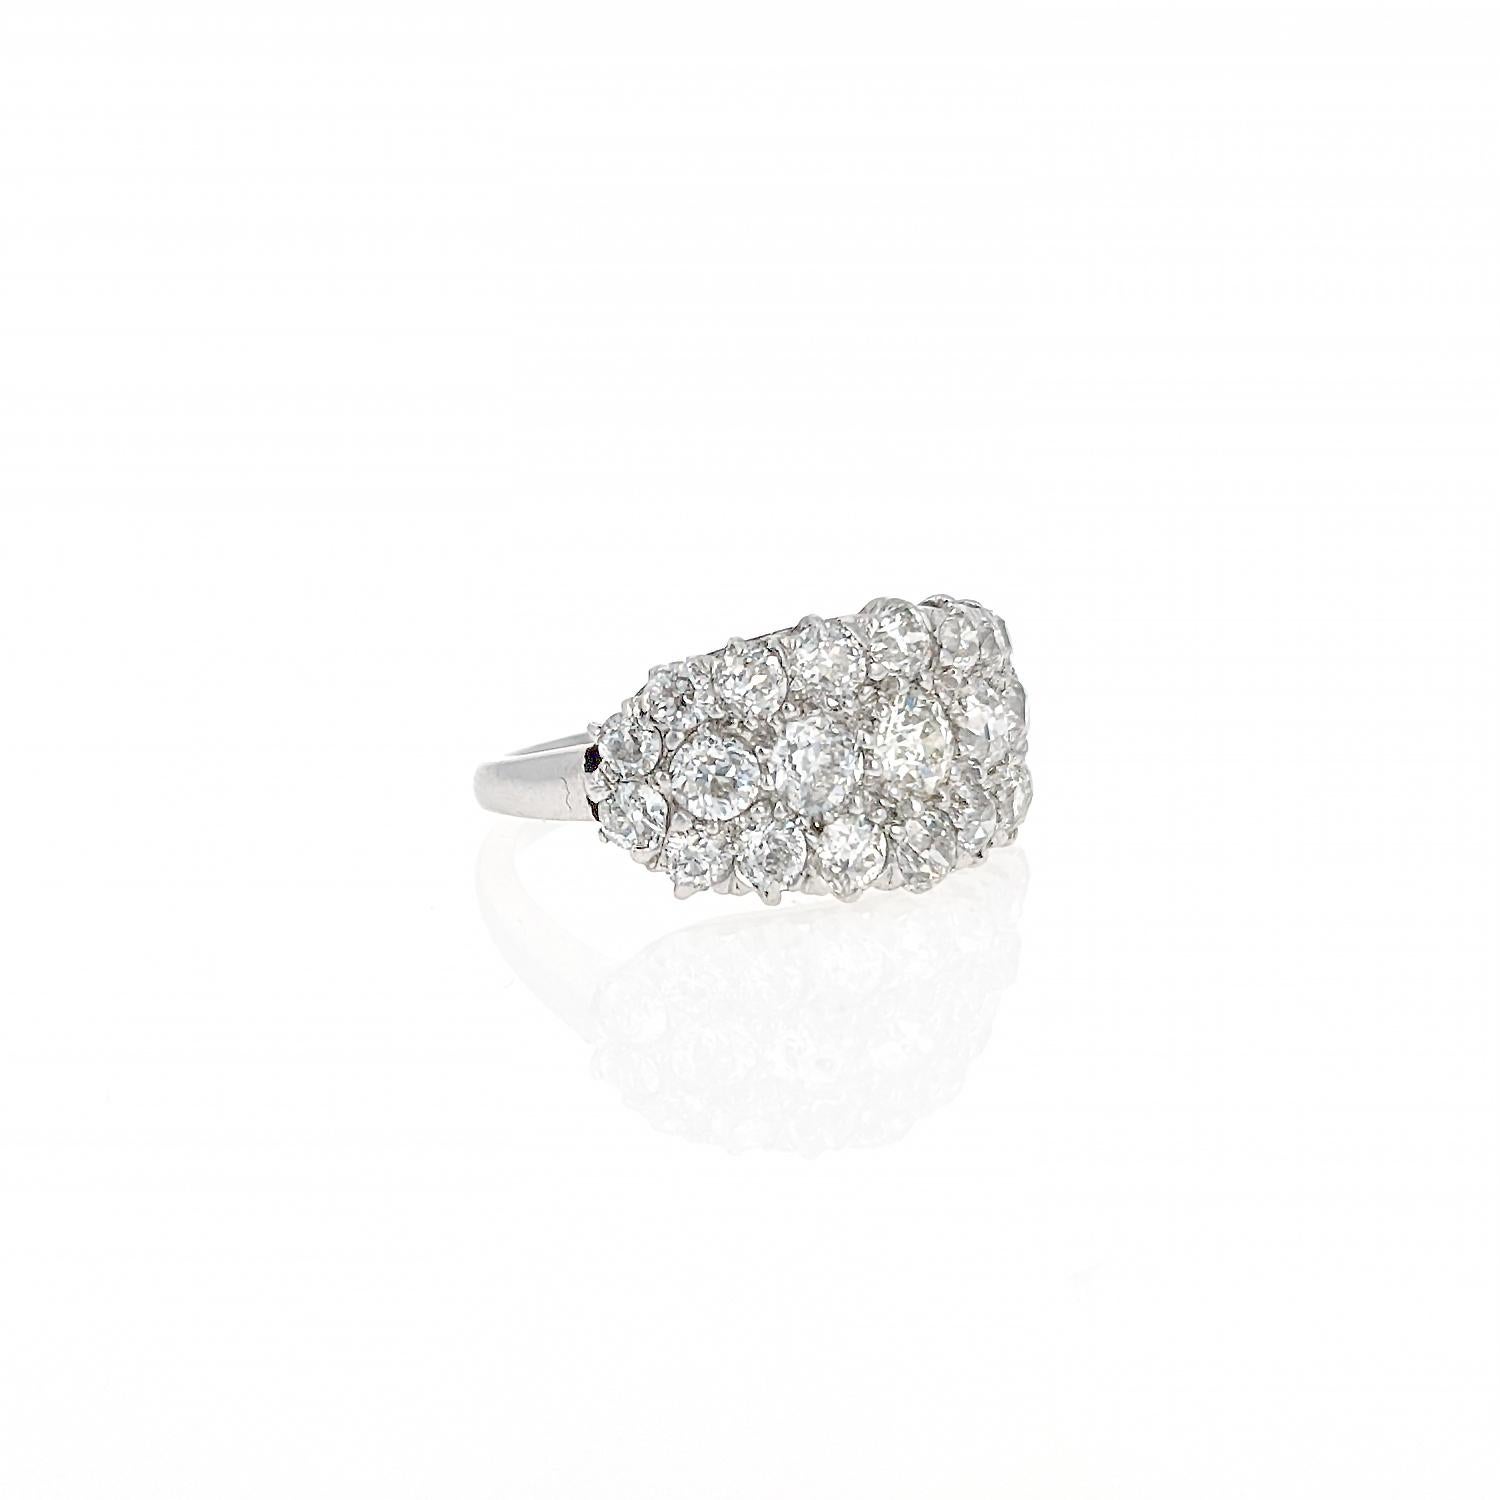 This ring is comprised of 23 old European cut diamonds weight approximately 3.25 carats total and is mounted in platinum. It  has a low-profile with wide band at the front and classic rounded shank to the back. This ring has a modern look yet the